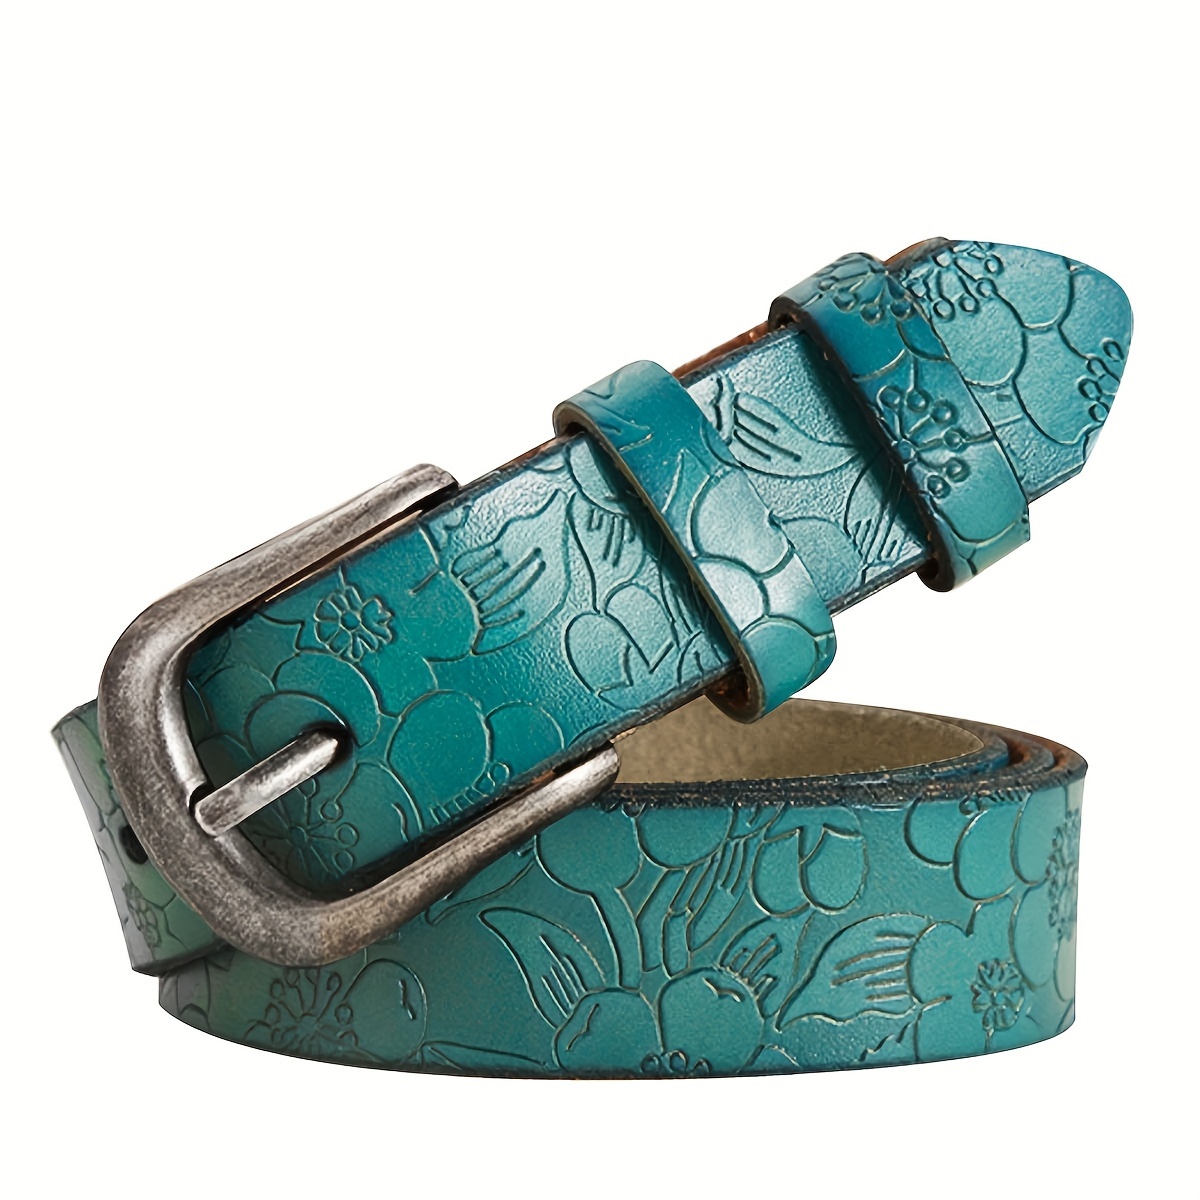 

Vintage Pin Buckle Leather Belt For Women Classic Flower Embossed Belts Casual Jeans Pants Waistband